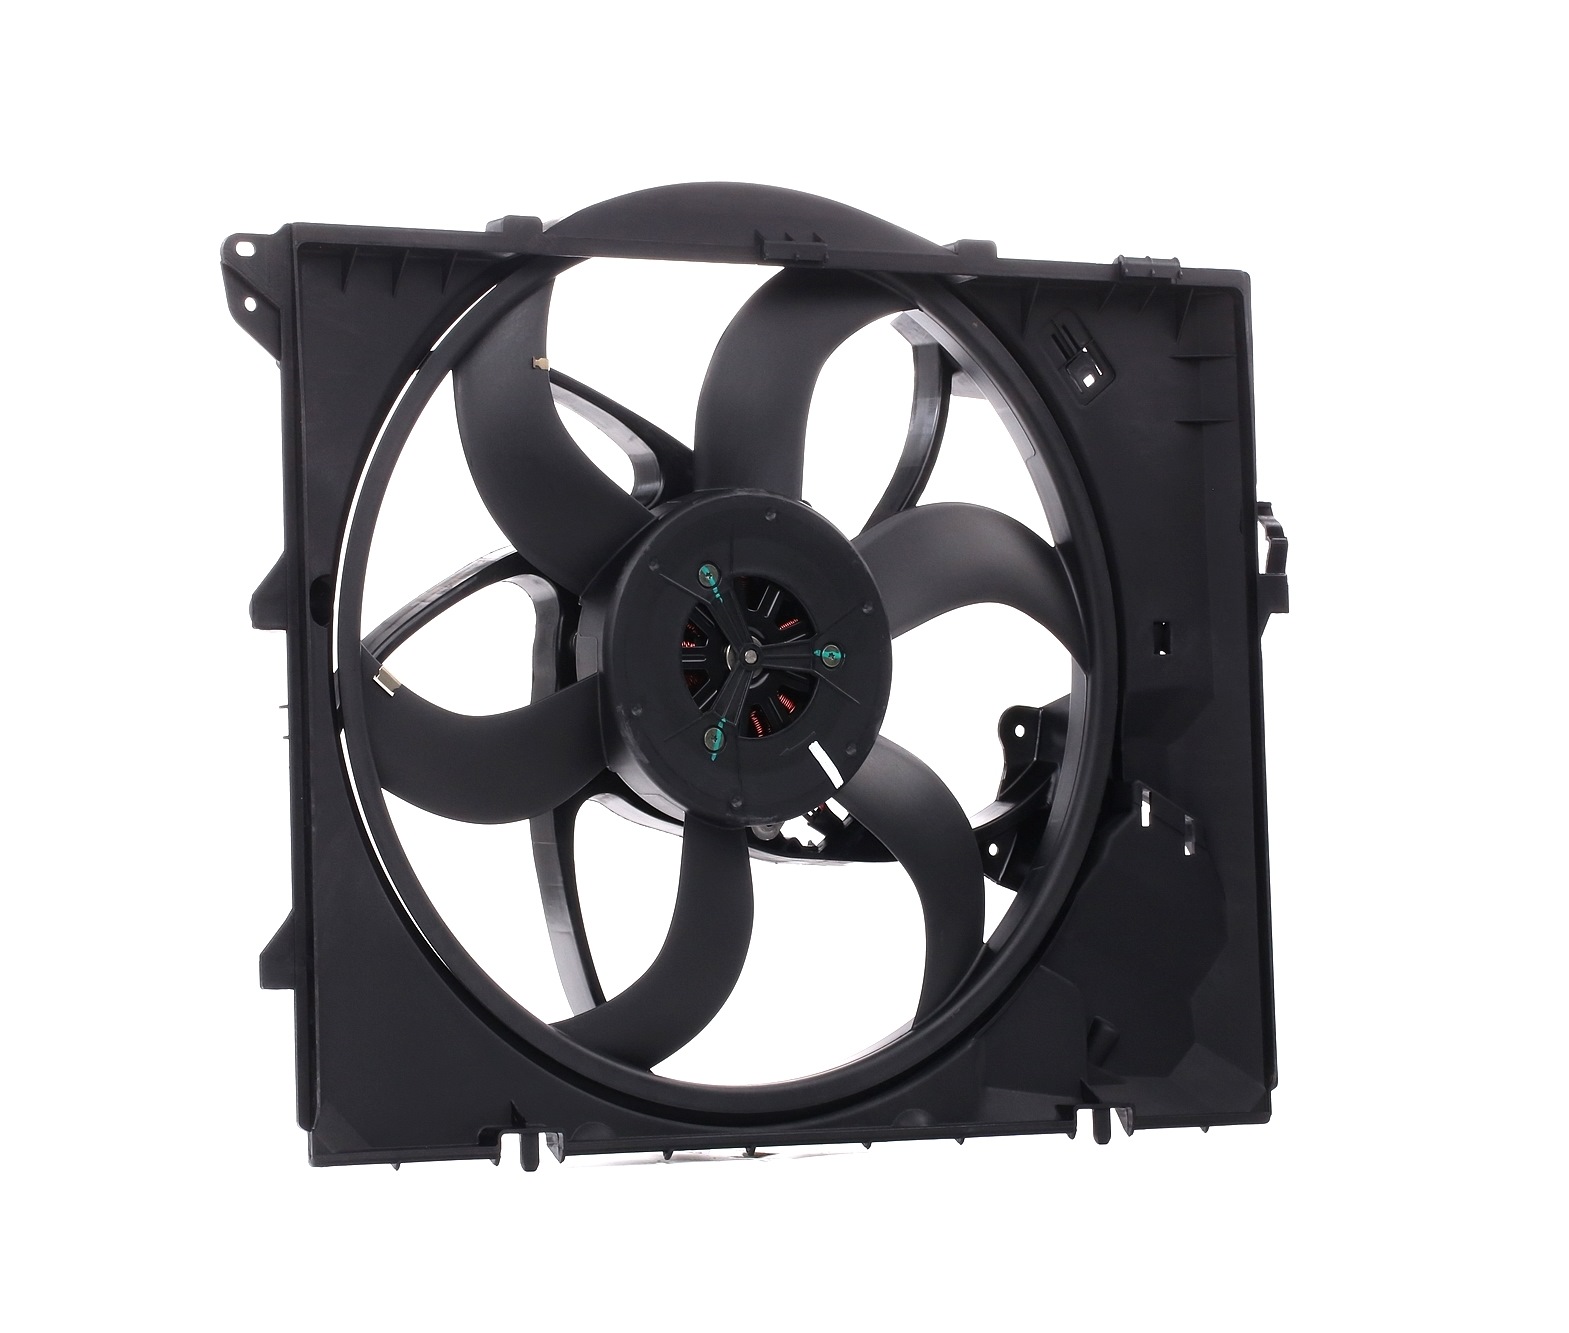 SKRF-0300020 STARK Cooling fan PORSCHE for vehicles with air conditioning, Ø: 490 mm, 12V, 400W, Electric